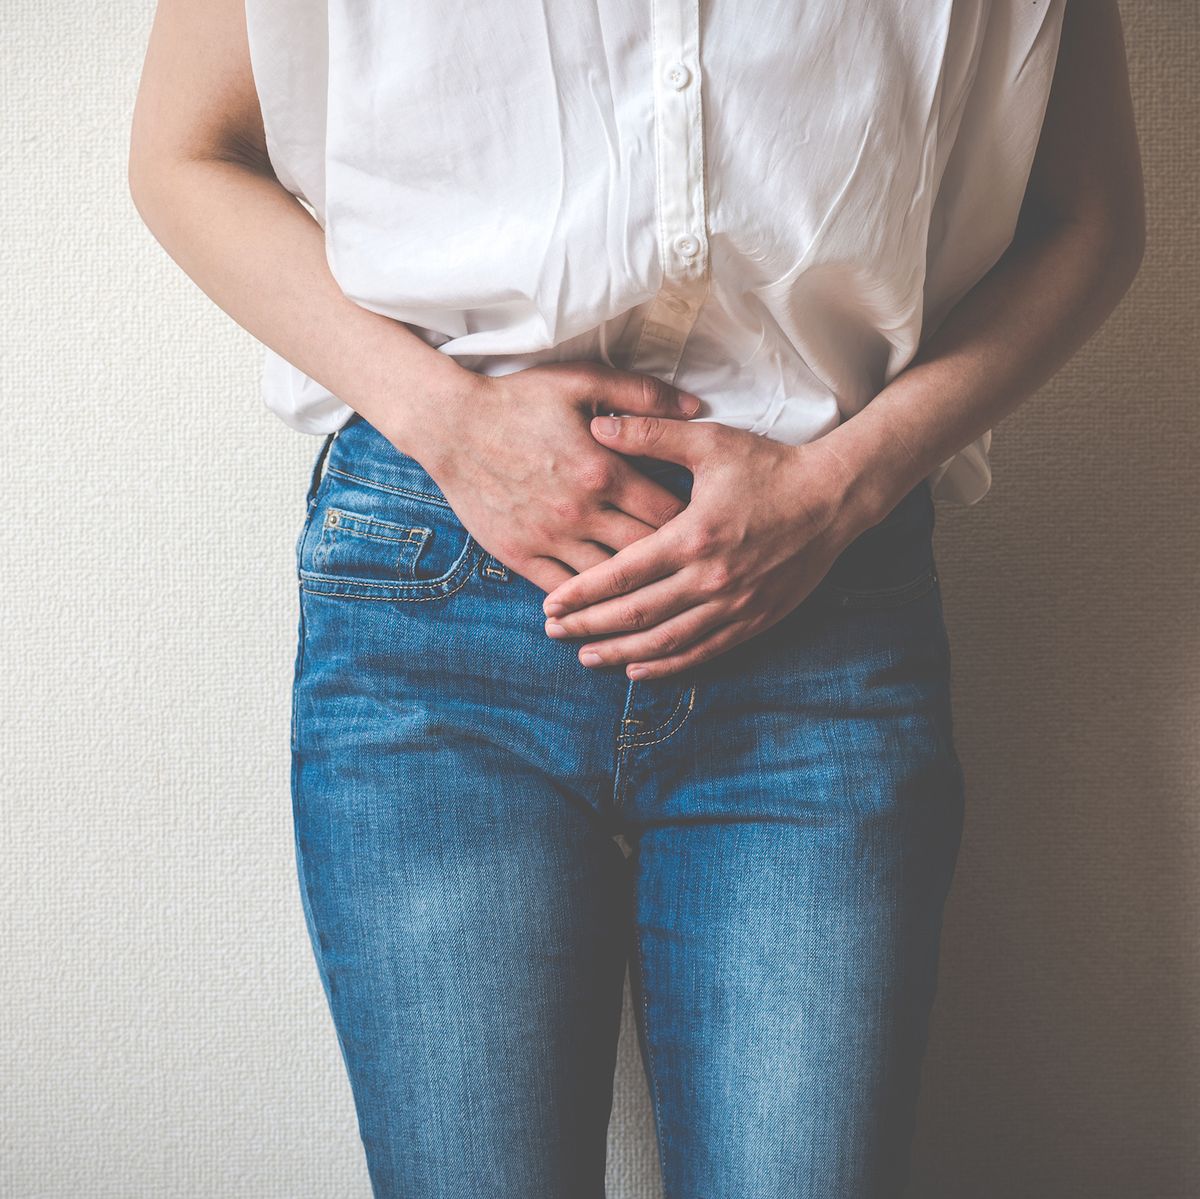 Ovarian Cyst Symptoms - How To Know If You Have An Ovarian Cyst